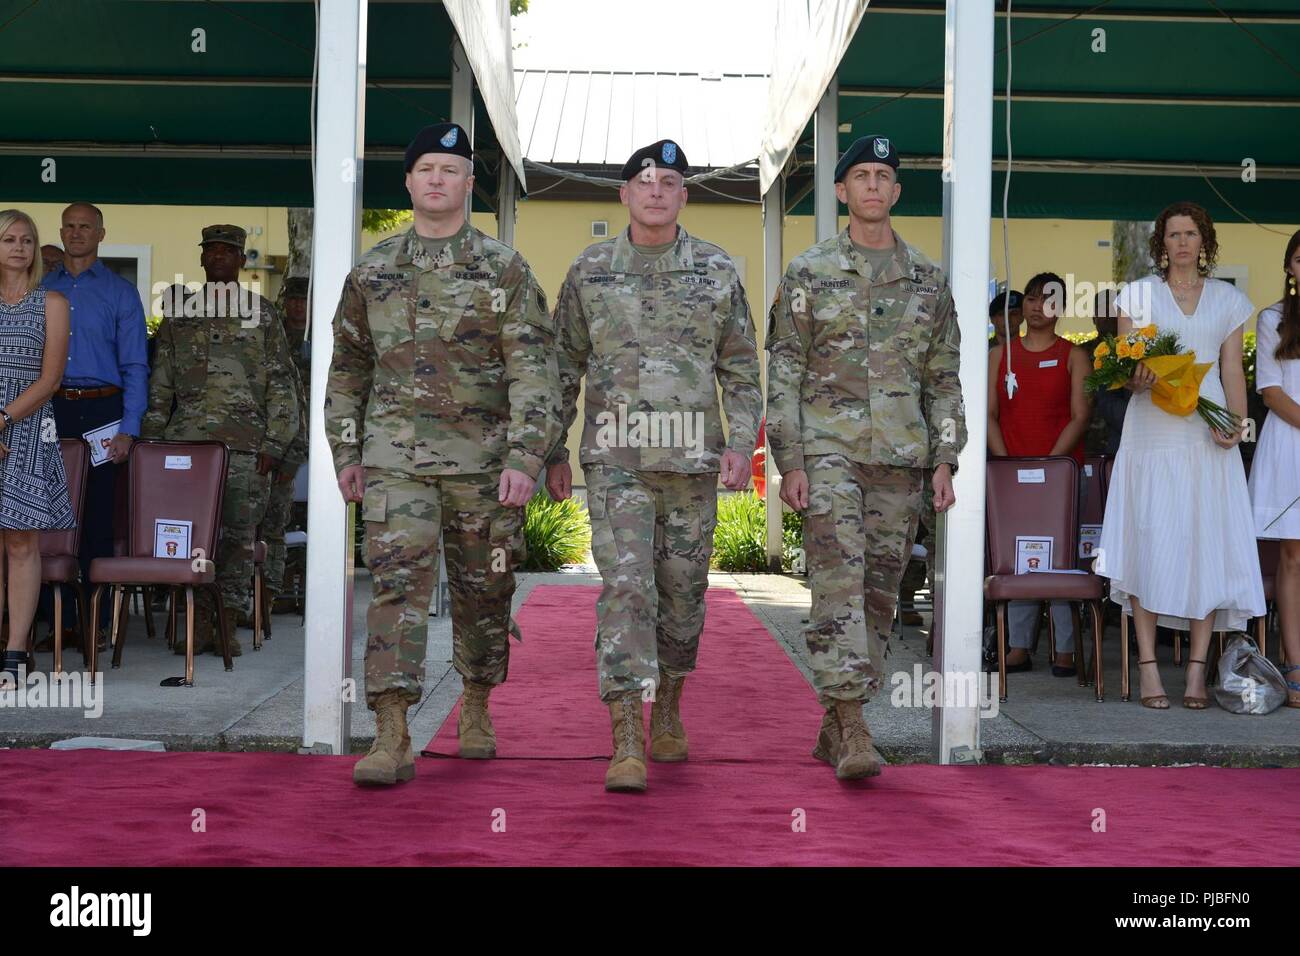 U.S. Army Africa, Brig. Gen. Eugene J. LeBoeuf, the U.S. Army Africa acting commanding general (center), Lt. Col. Marcus S. Hunter, Incoming Battalion Commander, Headquarters and Headquarters Battalion, U.S. Army Africa (left) and Lt. Col. Brett M. Medlin, outgoing Battalion Commander, Headquarters and Headquarters Battalion (right), arrive for a change of command ceremony at Caserma Ederle in Vicenza, Italy, July 12, 2018. Stock Photo